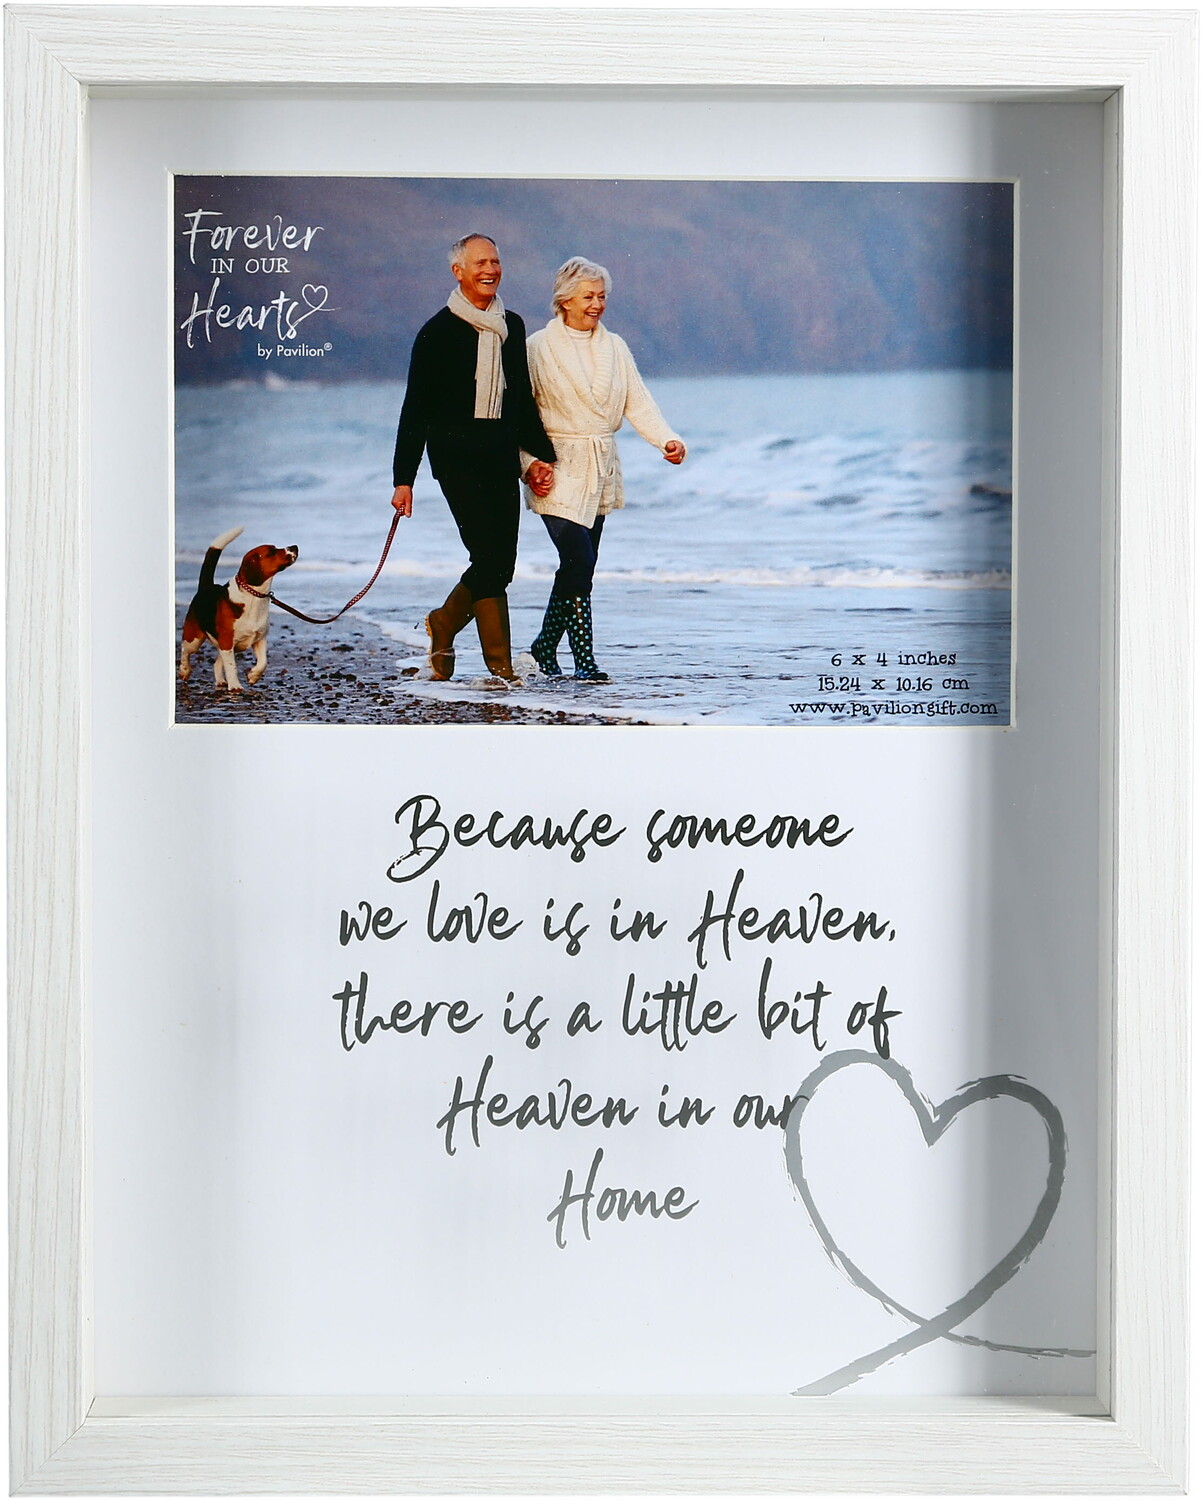 Heaven by Forever in our Hearts - Heaven - 7.5" x 9.5" Shadow Box Frame
(Holds 6" x 4" Photo)